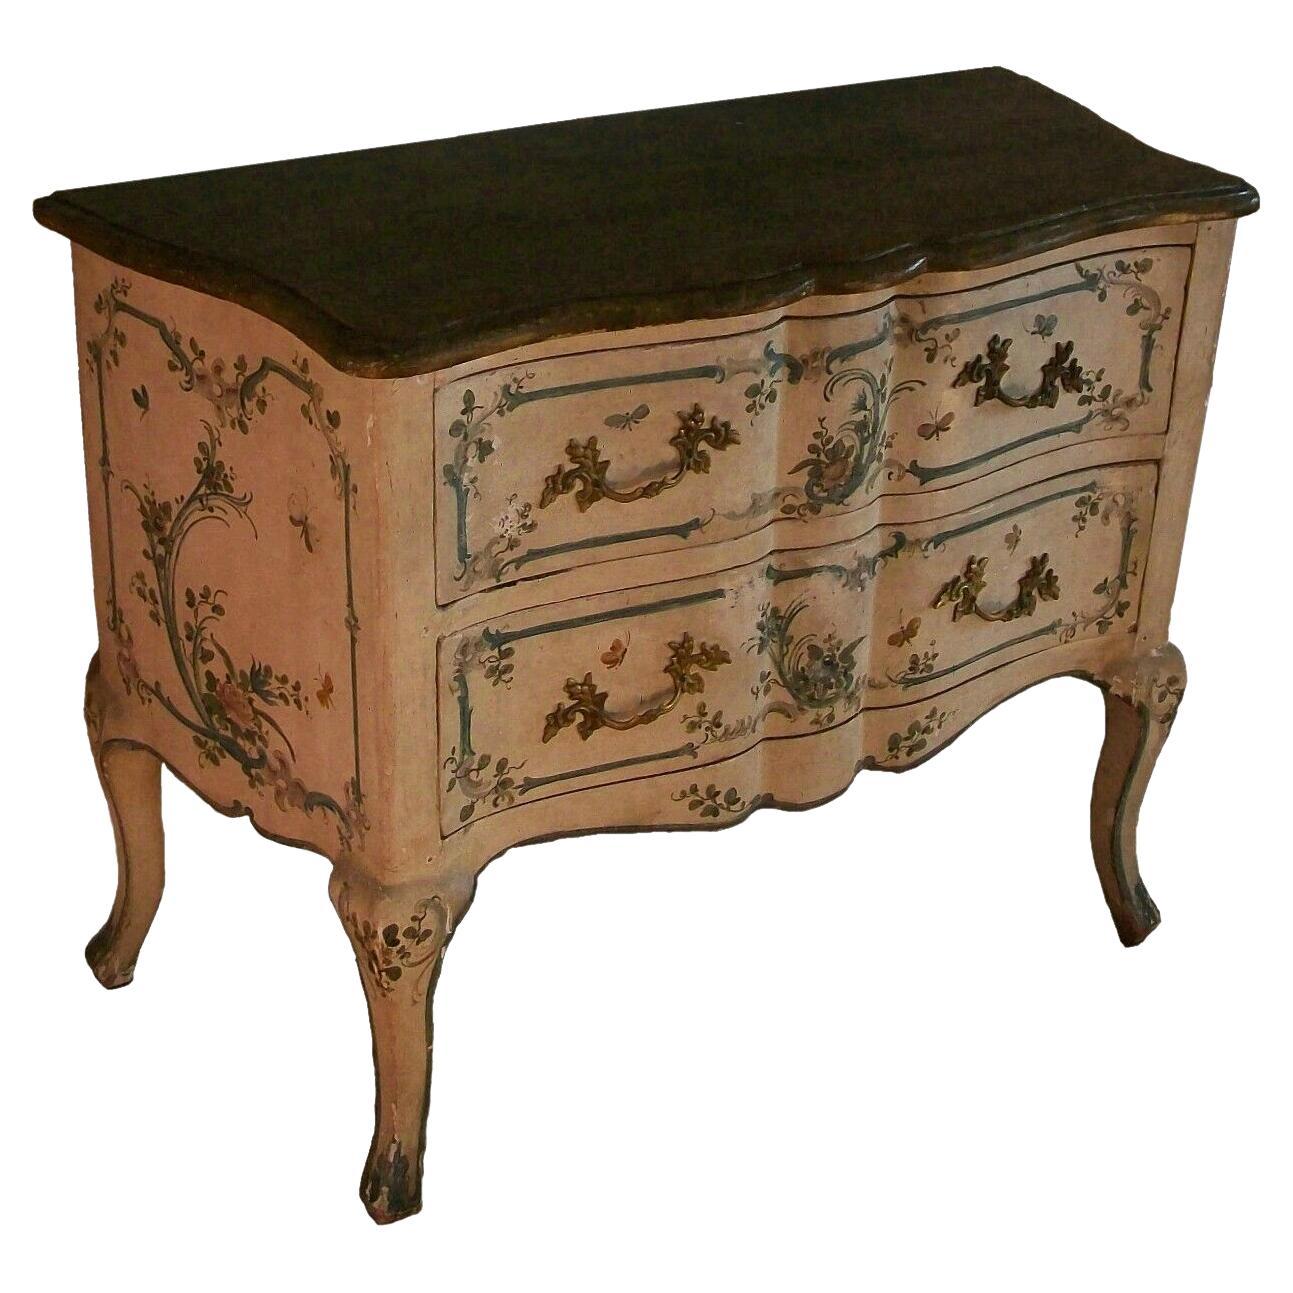 Italian Rococo Floral & Butterfly Painted Chest of Drawers, Mid 19th Century For Sale